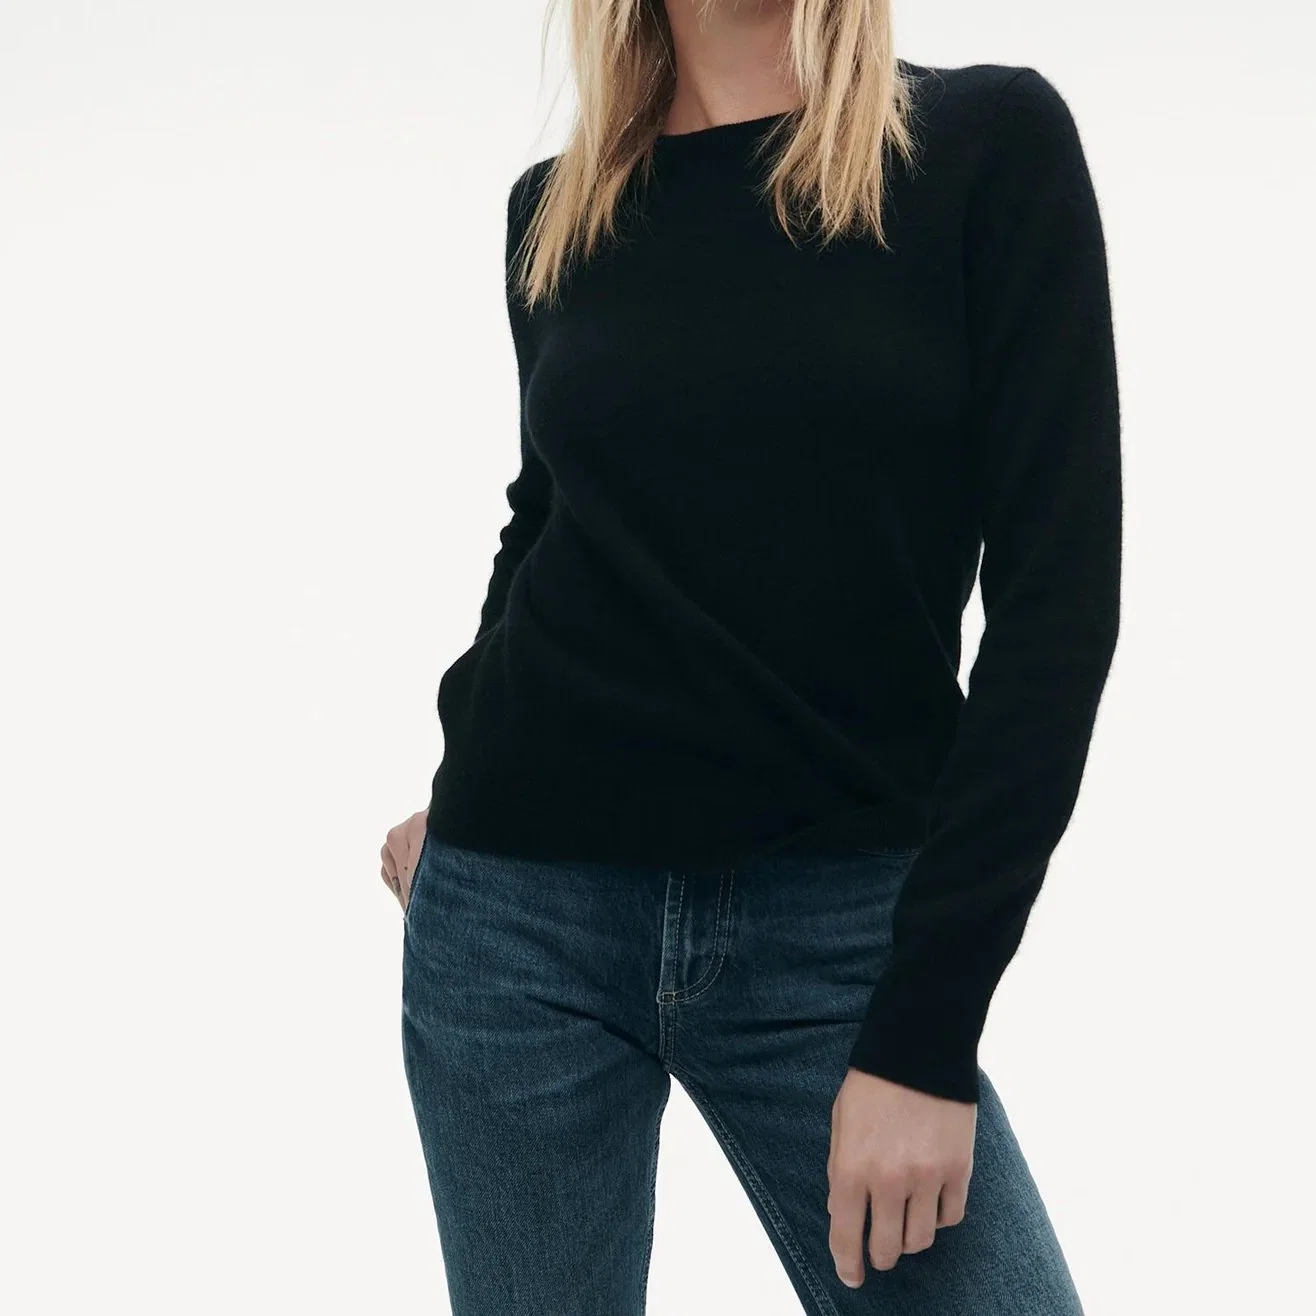 100% Cashmere Basic Style Pullover Sweater Apparel